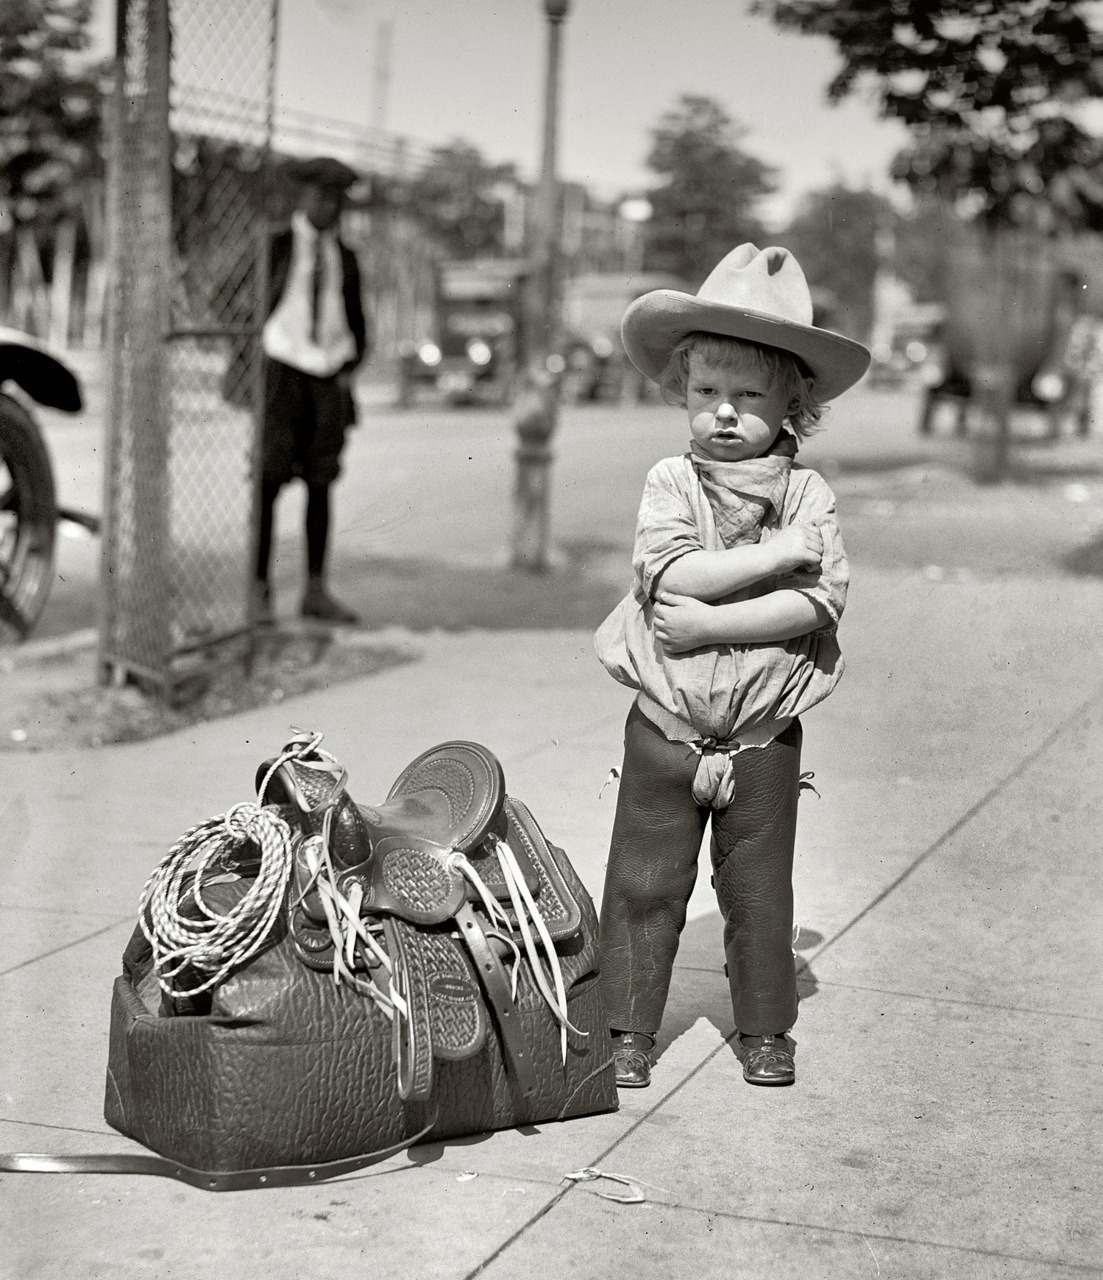 National Photo Company Collection
Foghorn Clancy Jr. Youngest member of the rodeo to perform in Wild West show during the Shrine convention. Washington, D.C. May 29, 1923
Thanks to Shorpy Historic Photo Archive - View full size